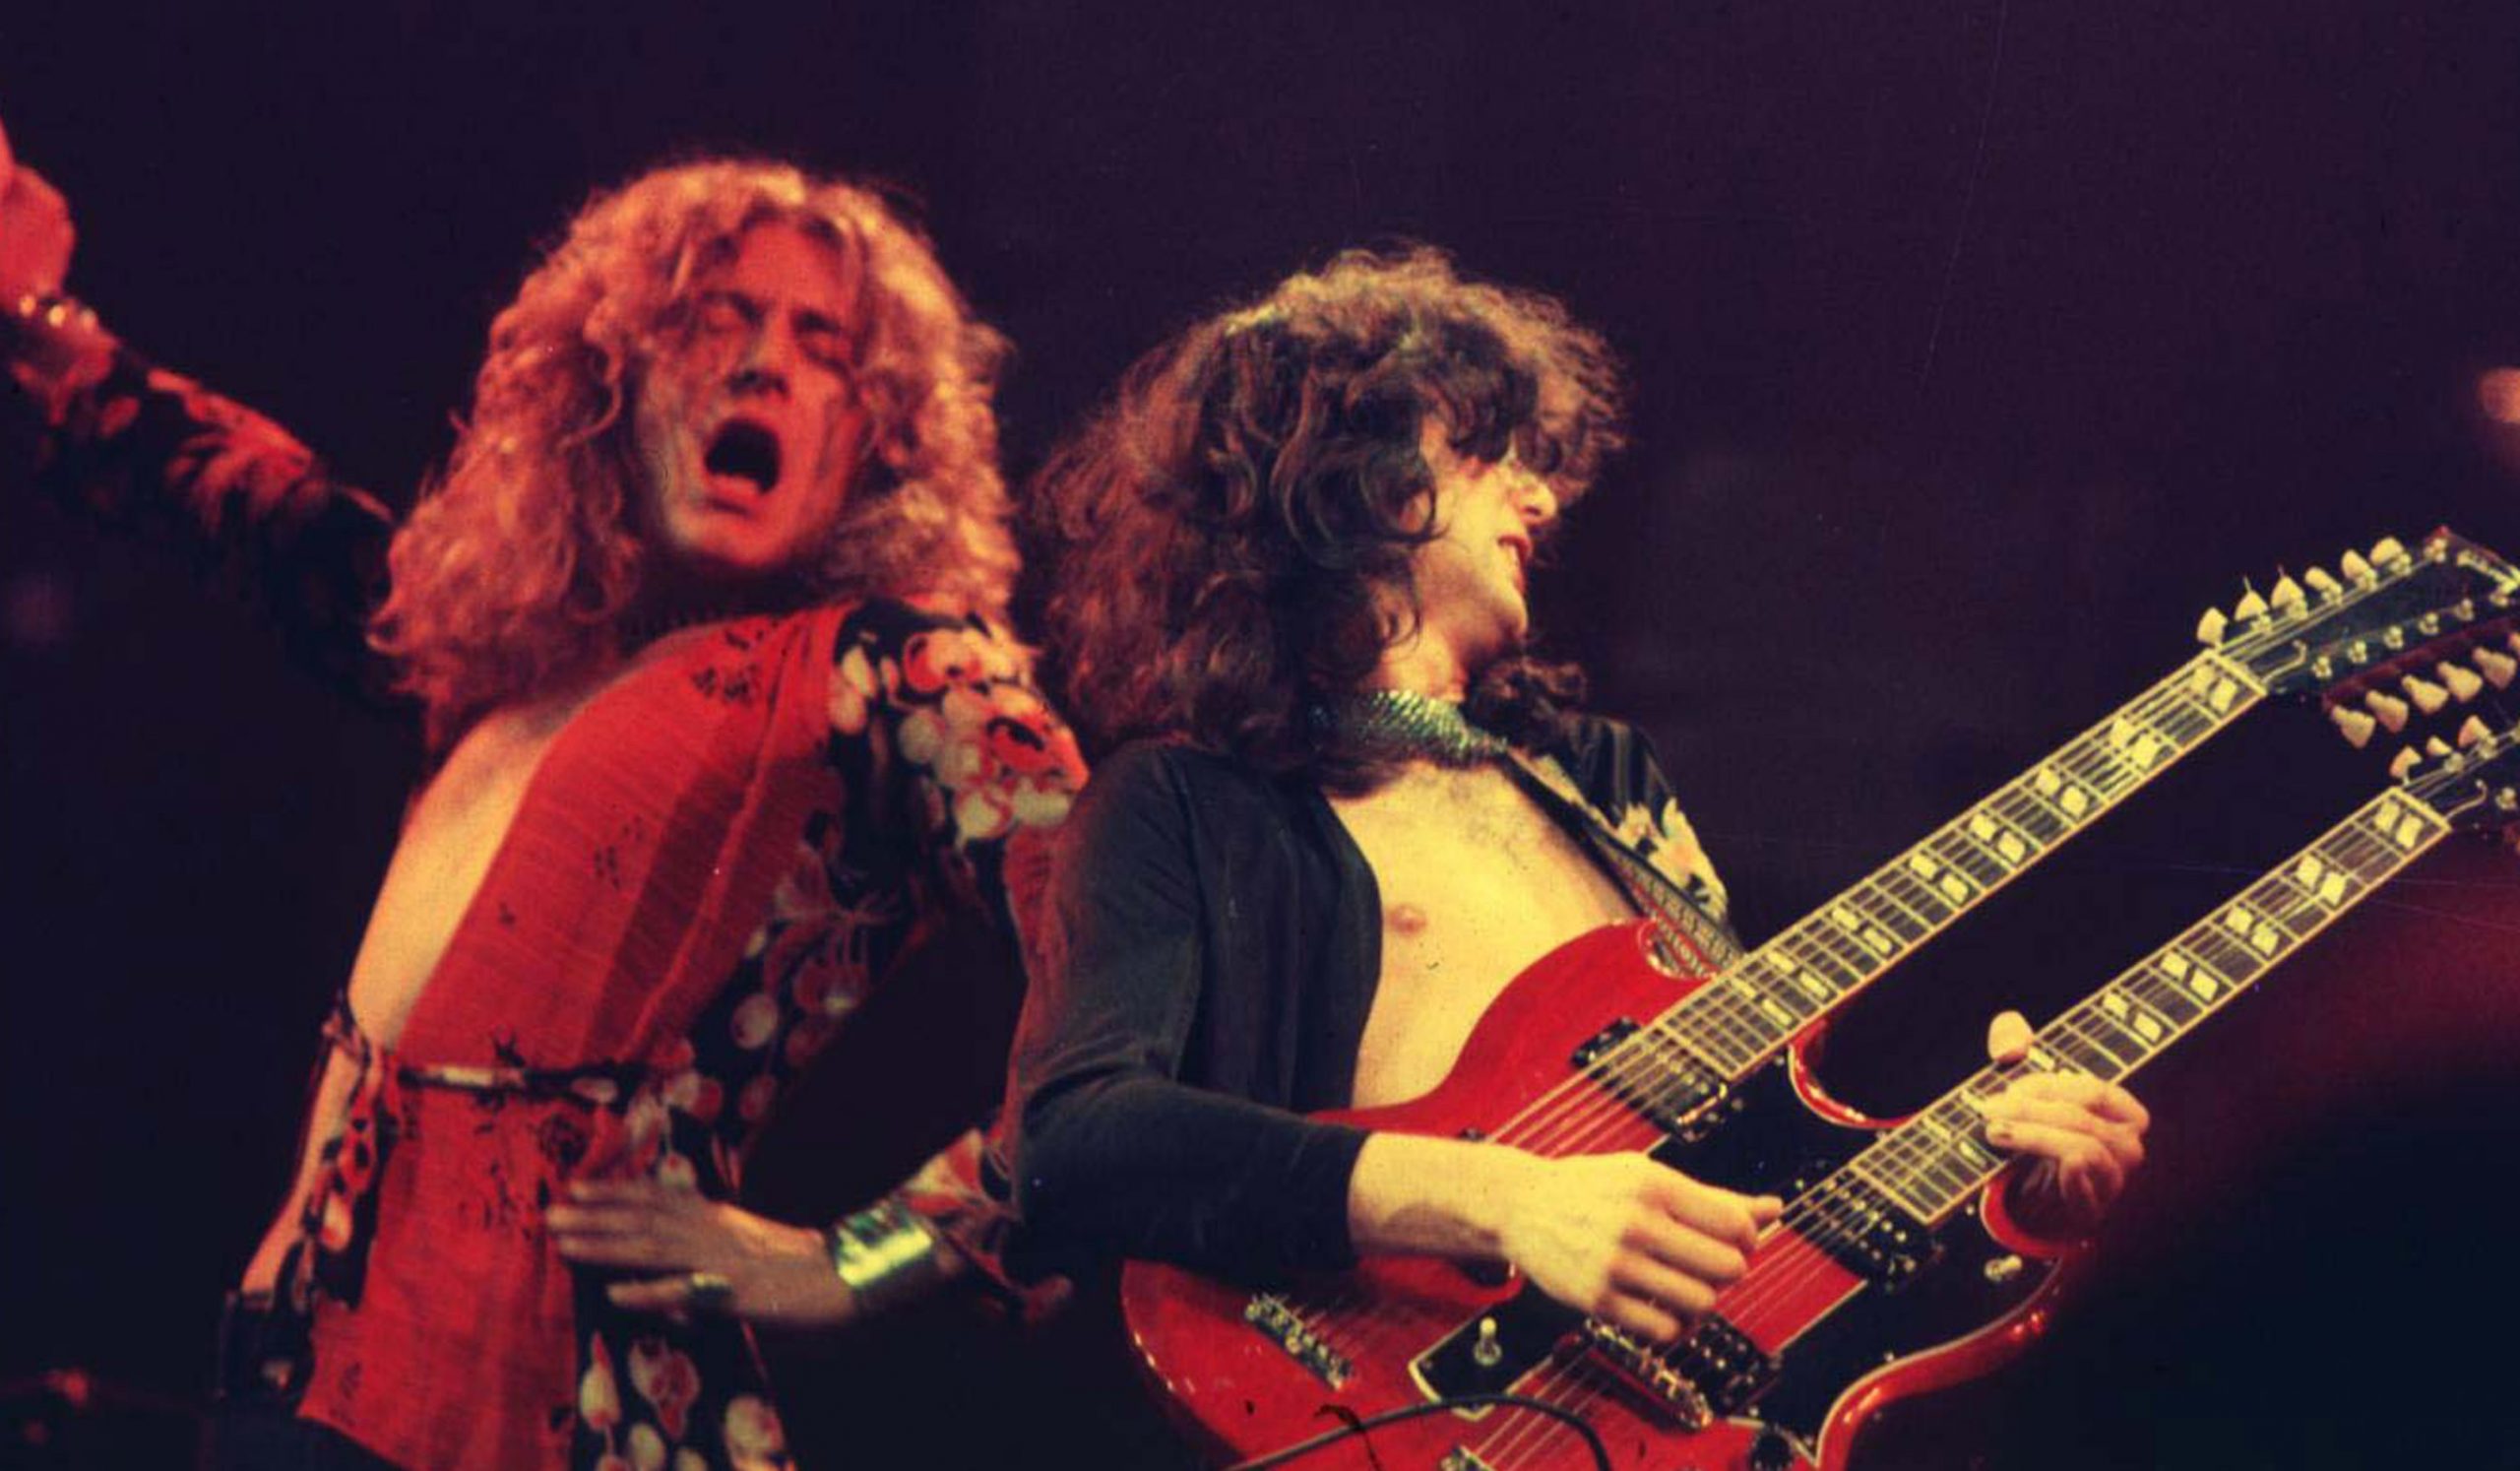 Becoming Led Zeppelin la recensione